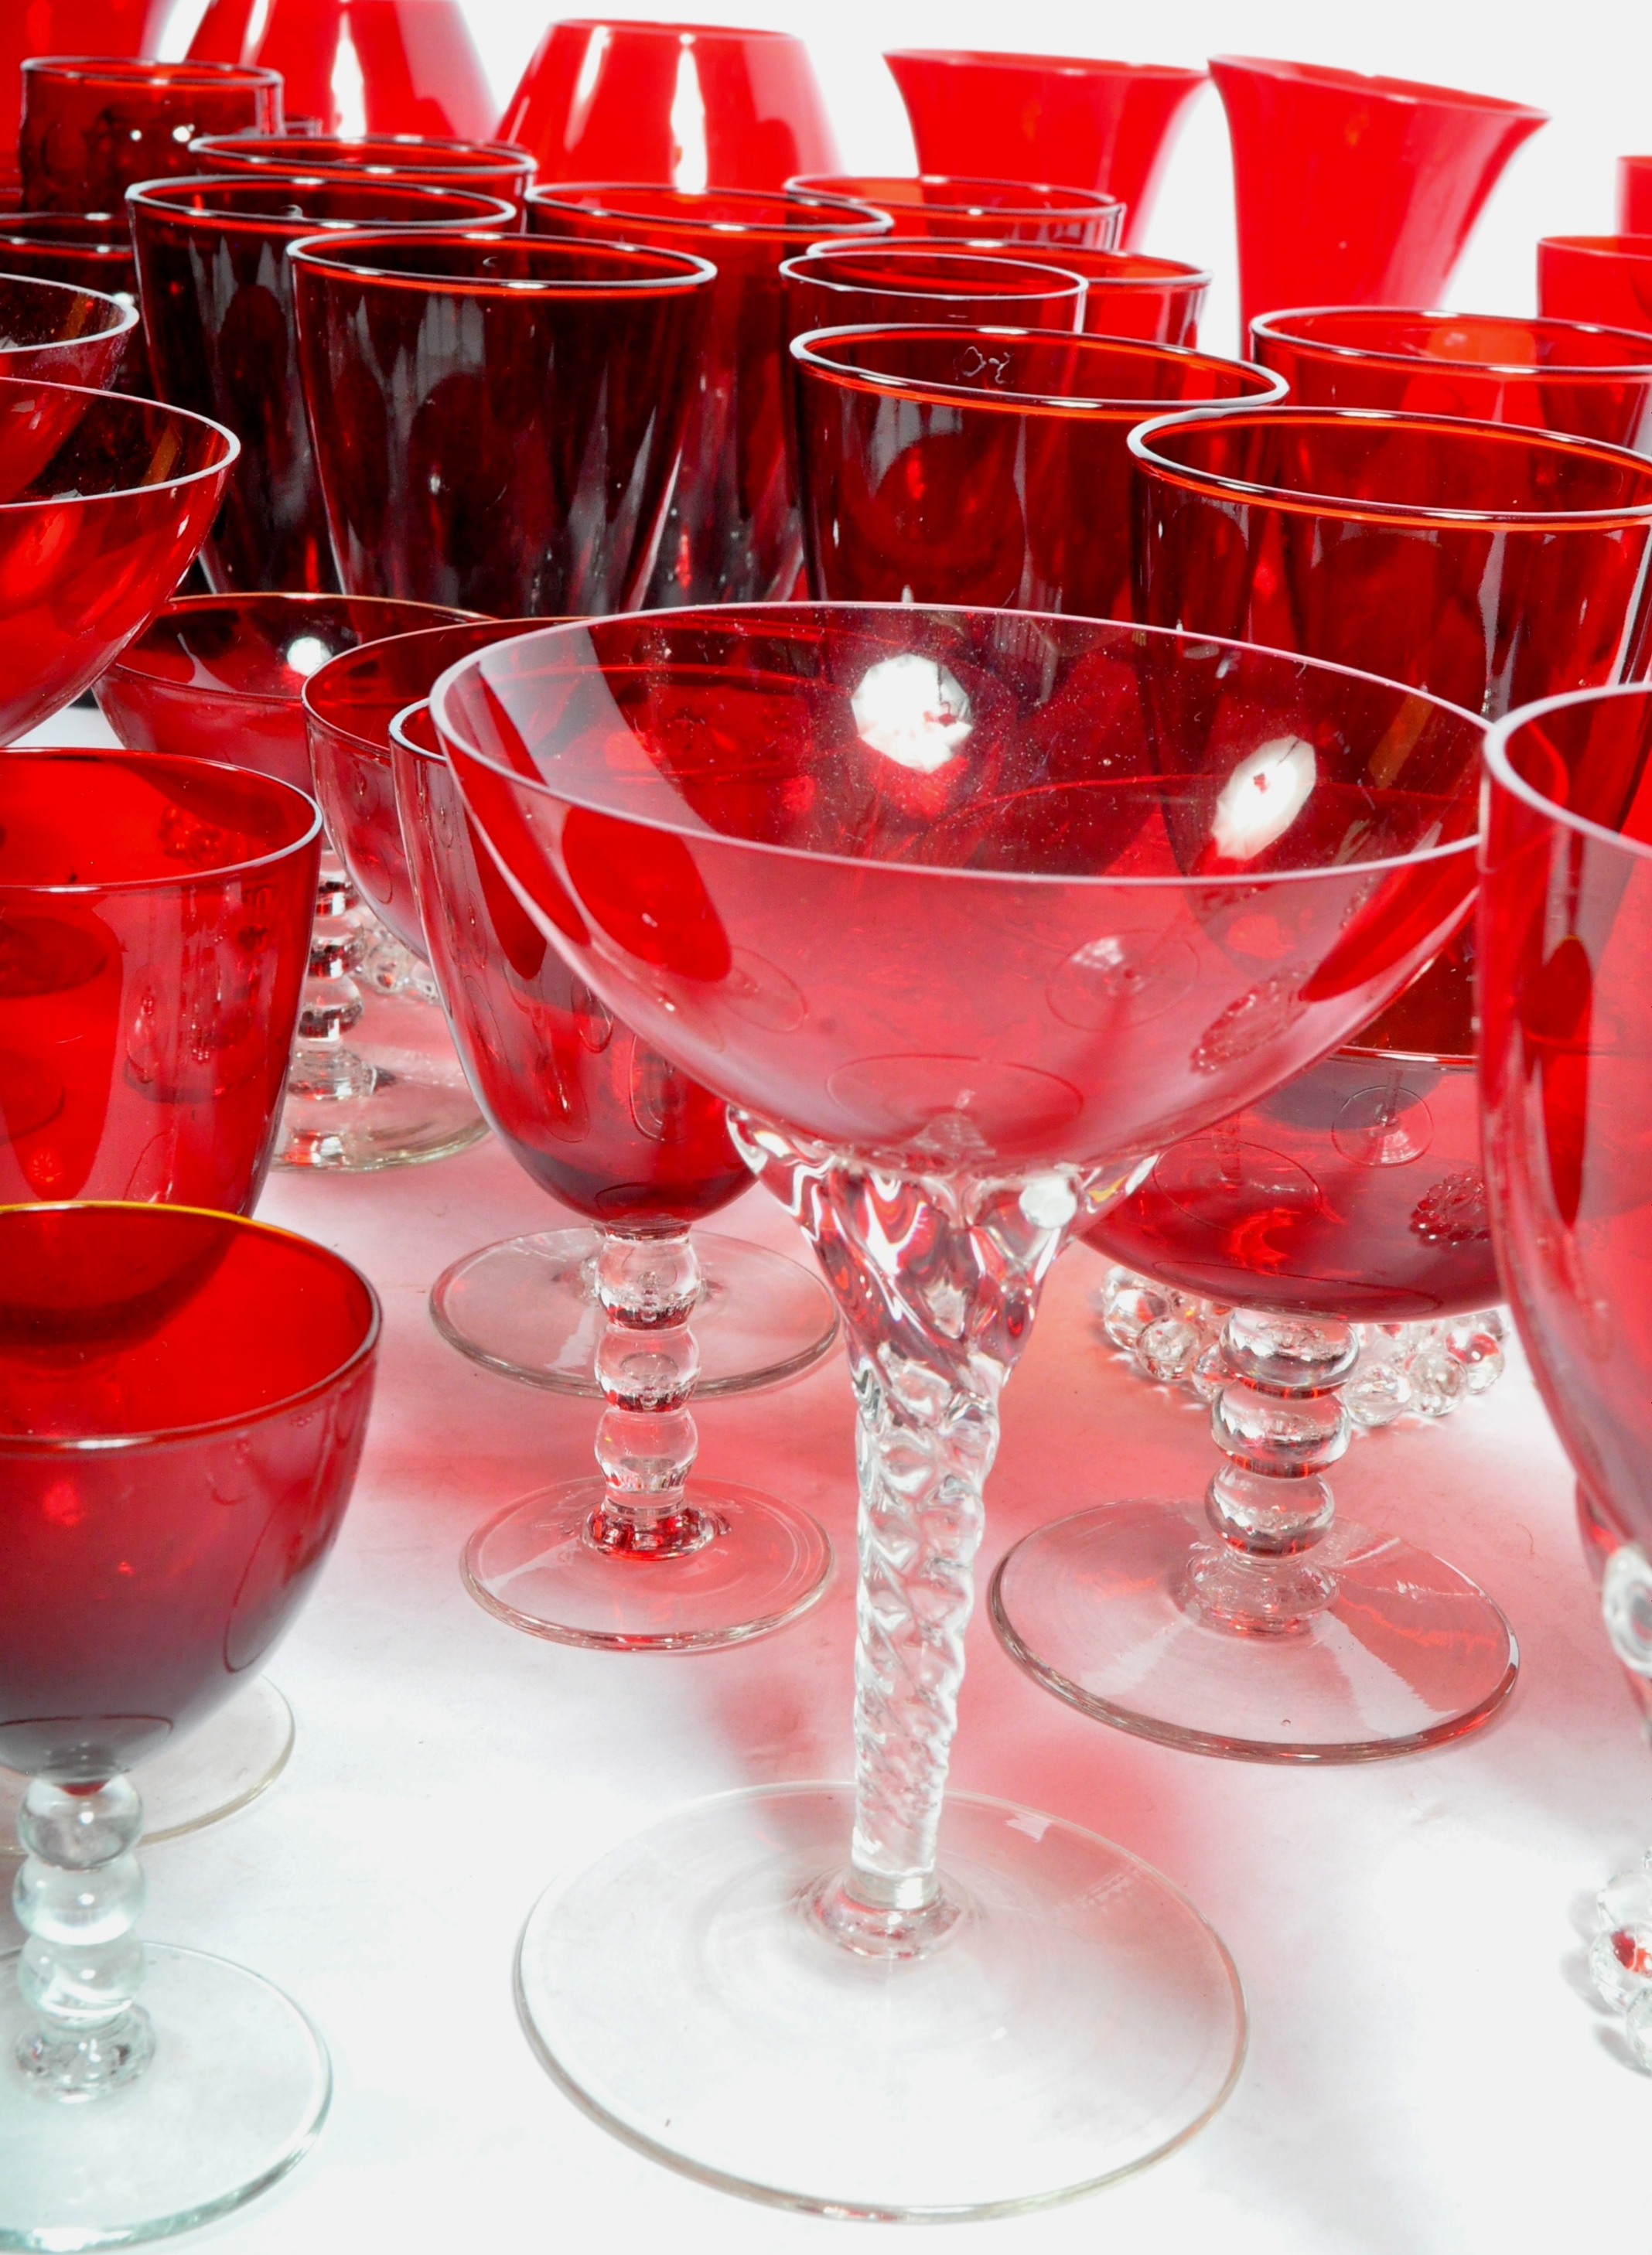 LARGE MIXED COLLECTION OF RED ANCHOR HOCKING GLASSWARE - Image 5 of 9